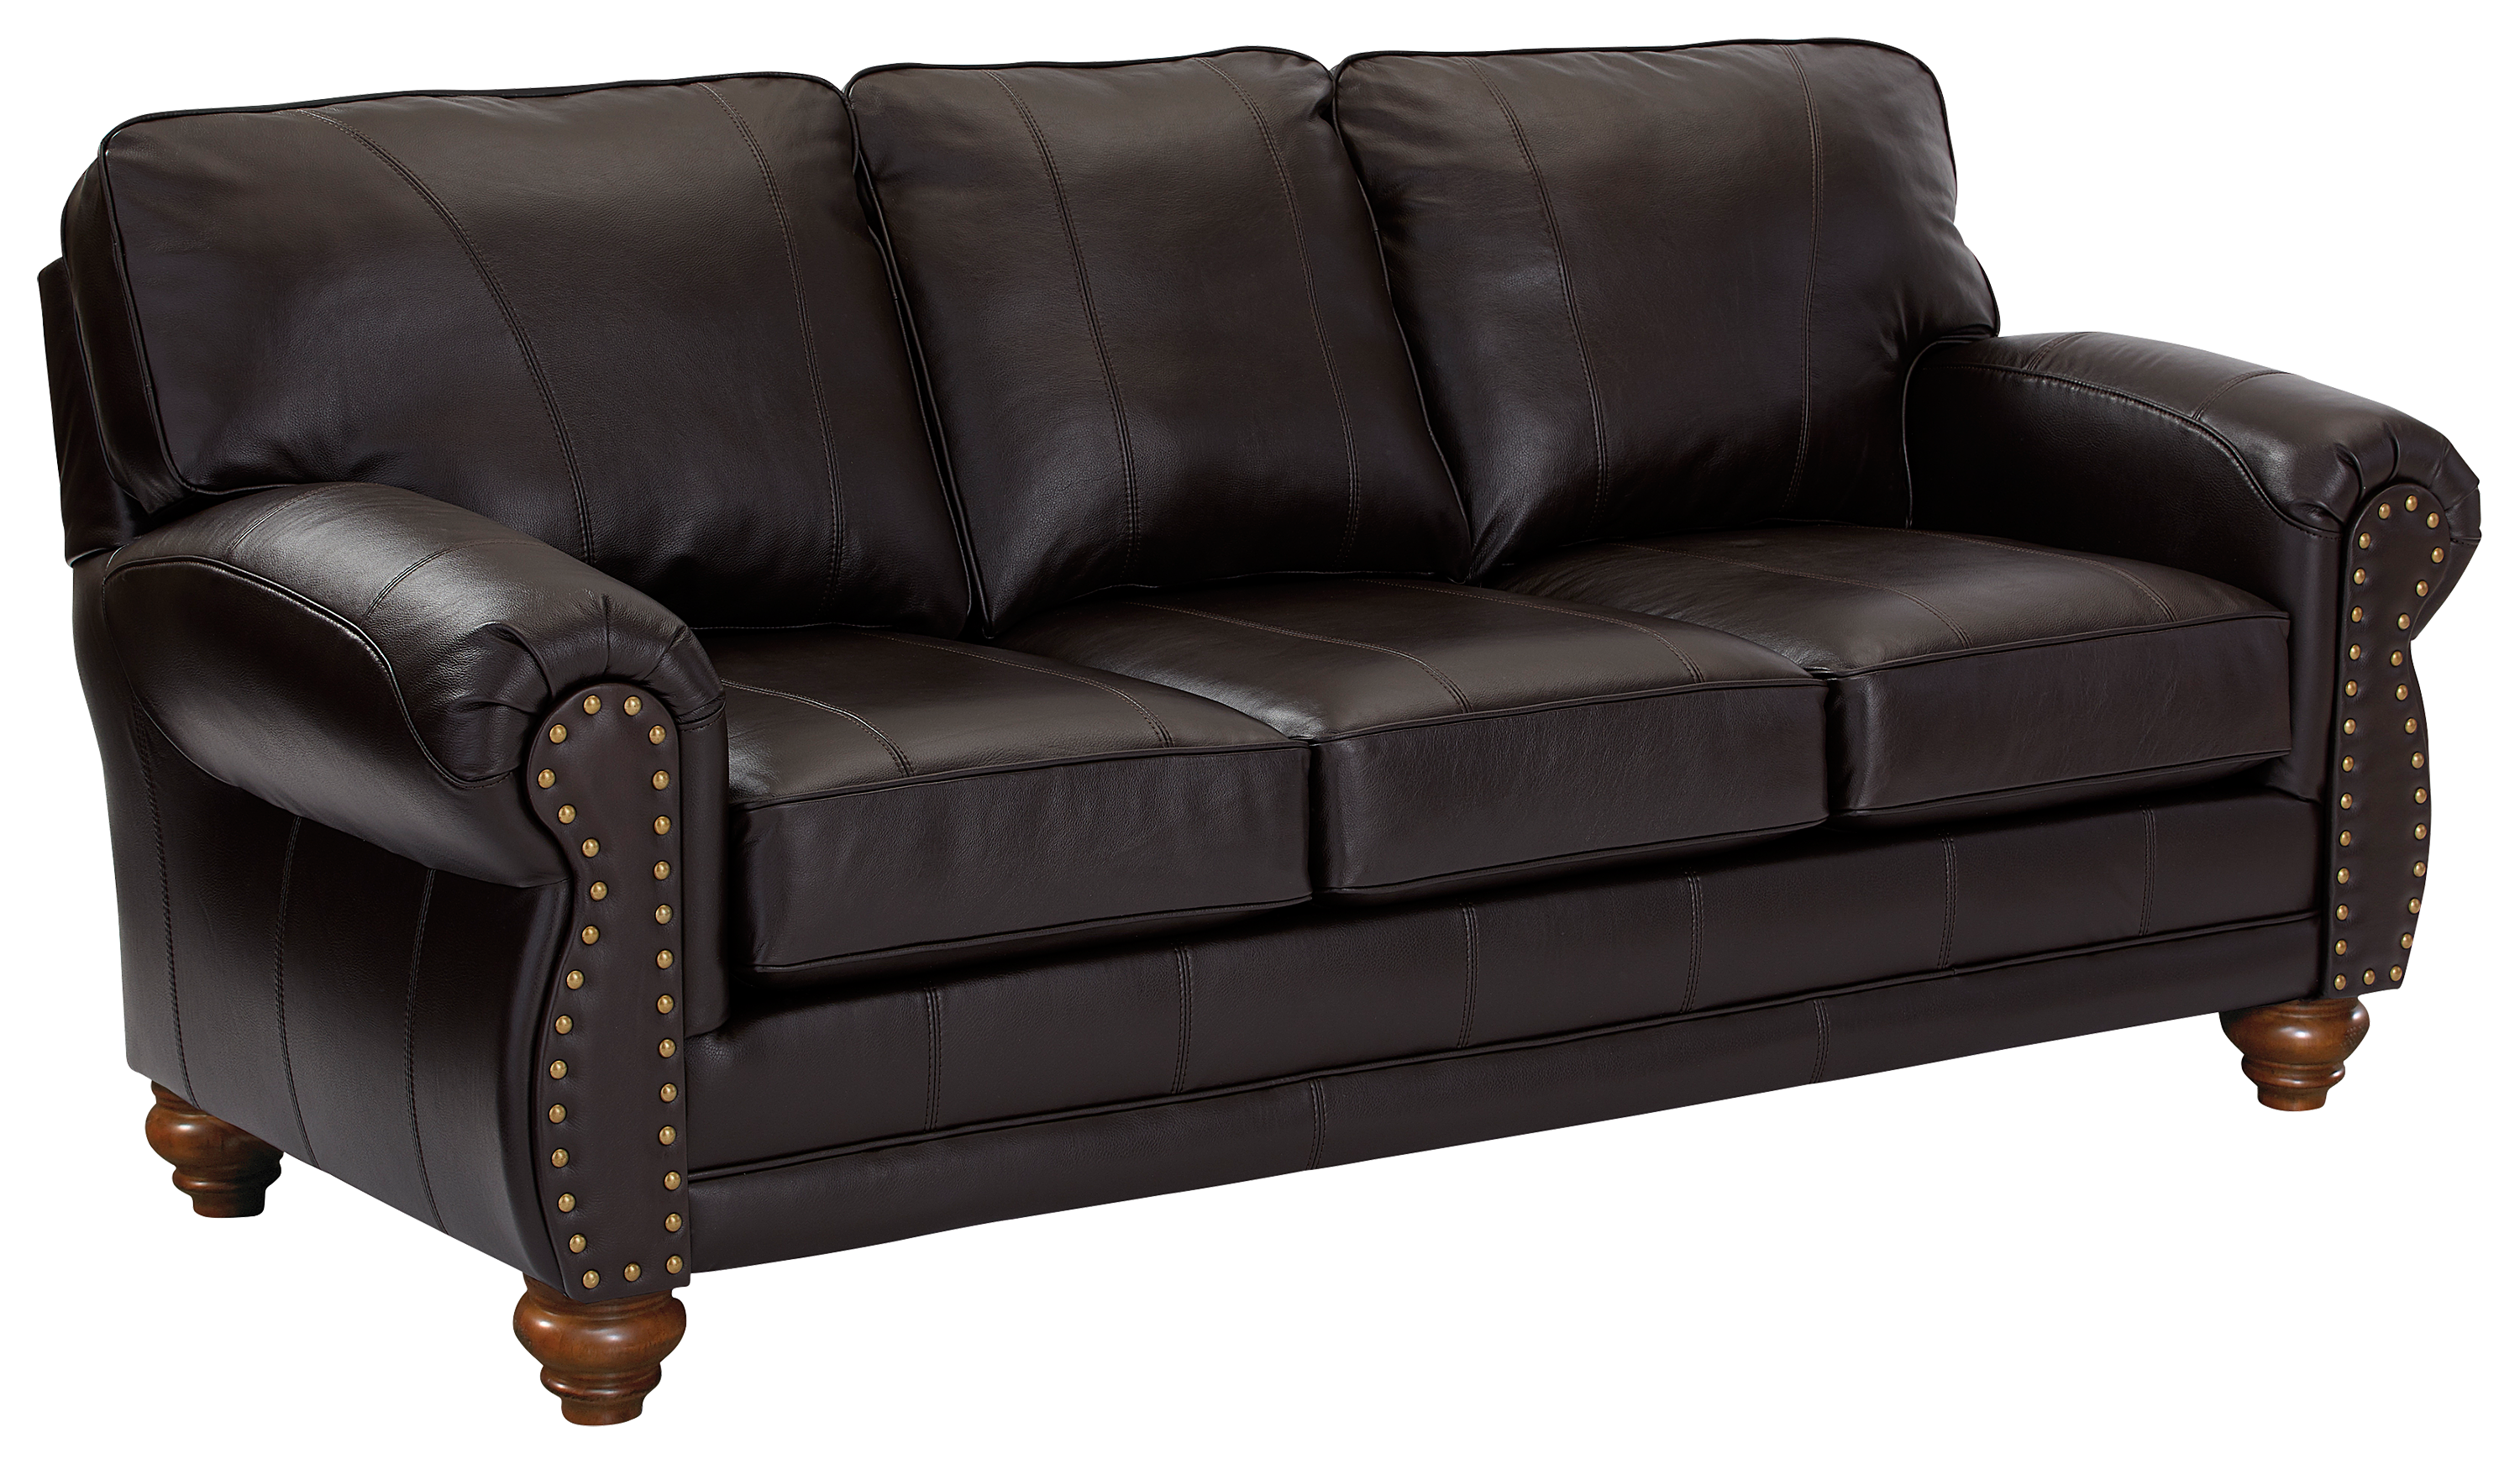 Best Home Furnishings Noble Furniture Collection Stationary Sofa | Bass Pro  Shops